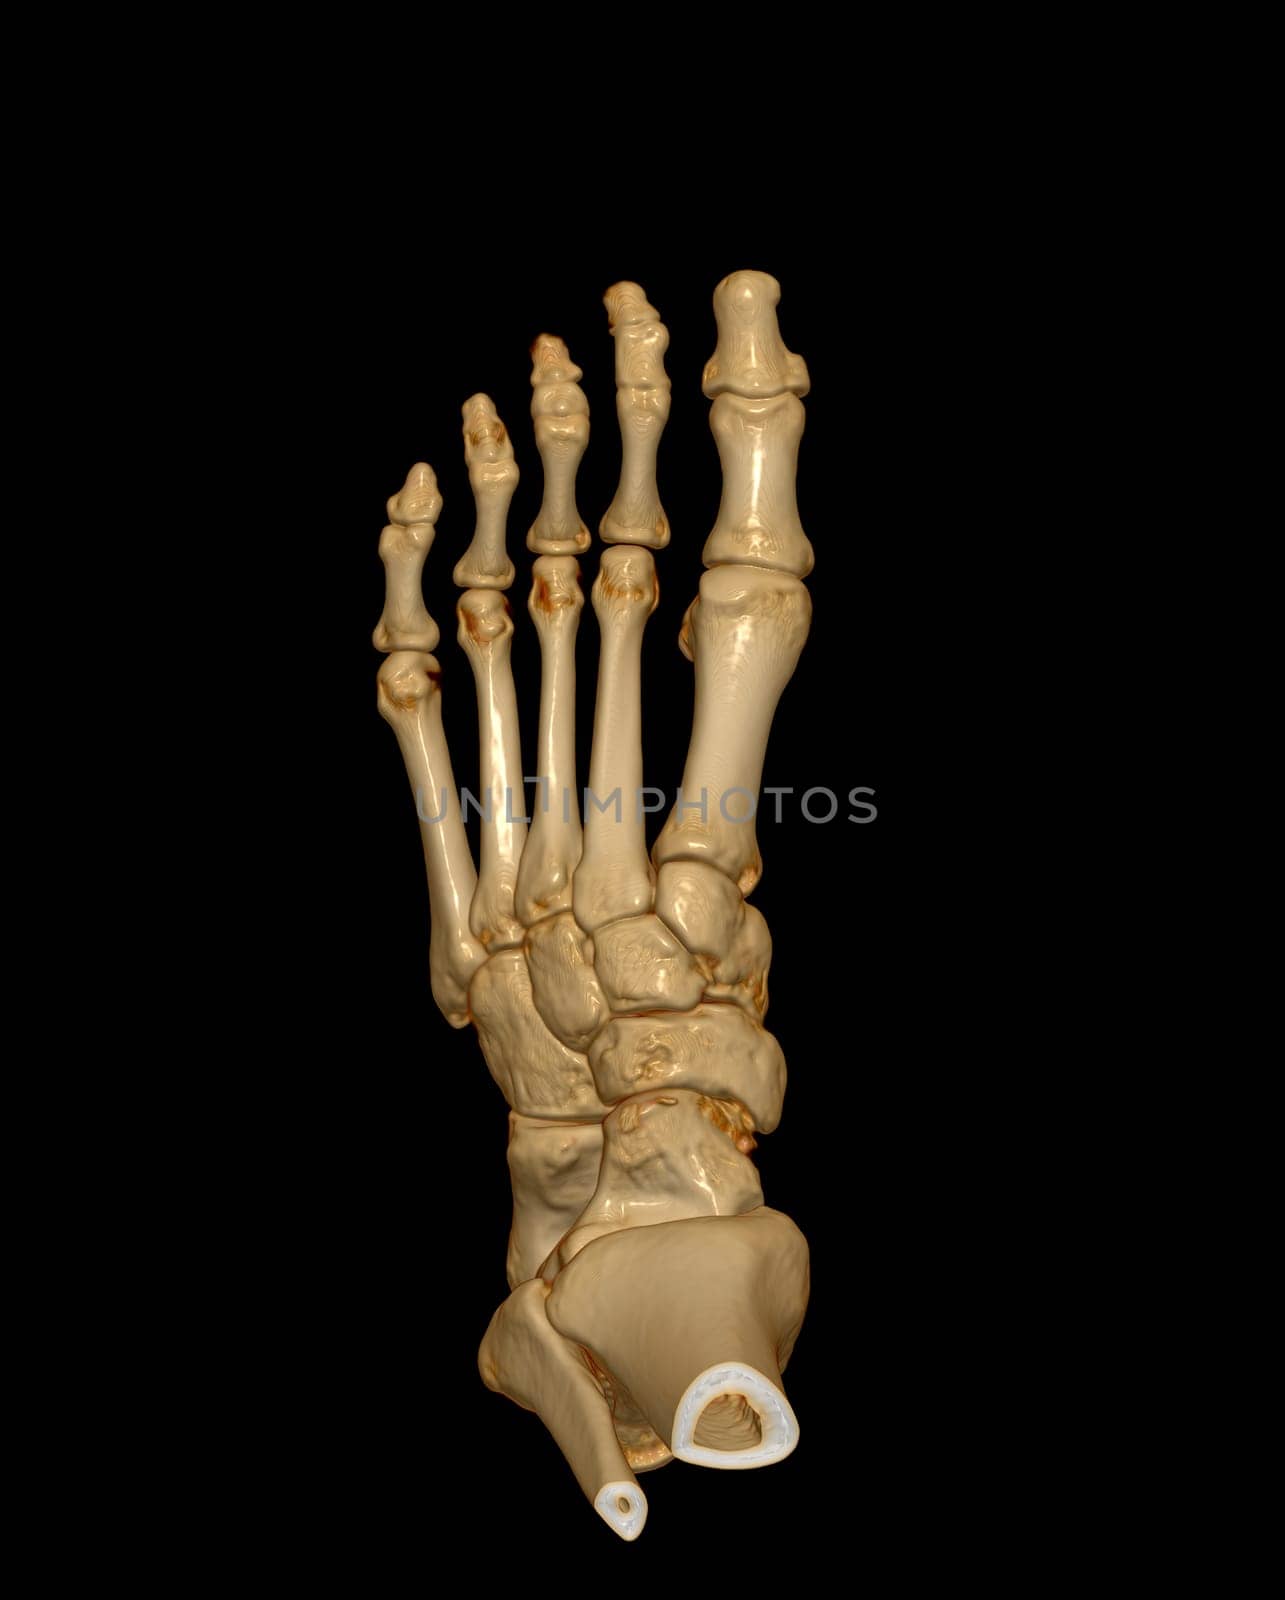 3D rendering of the foot bones for diagnosis bone fracture and rheumatoid arthritis from CT scannner.